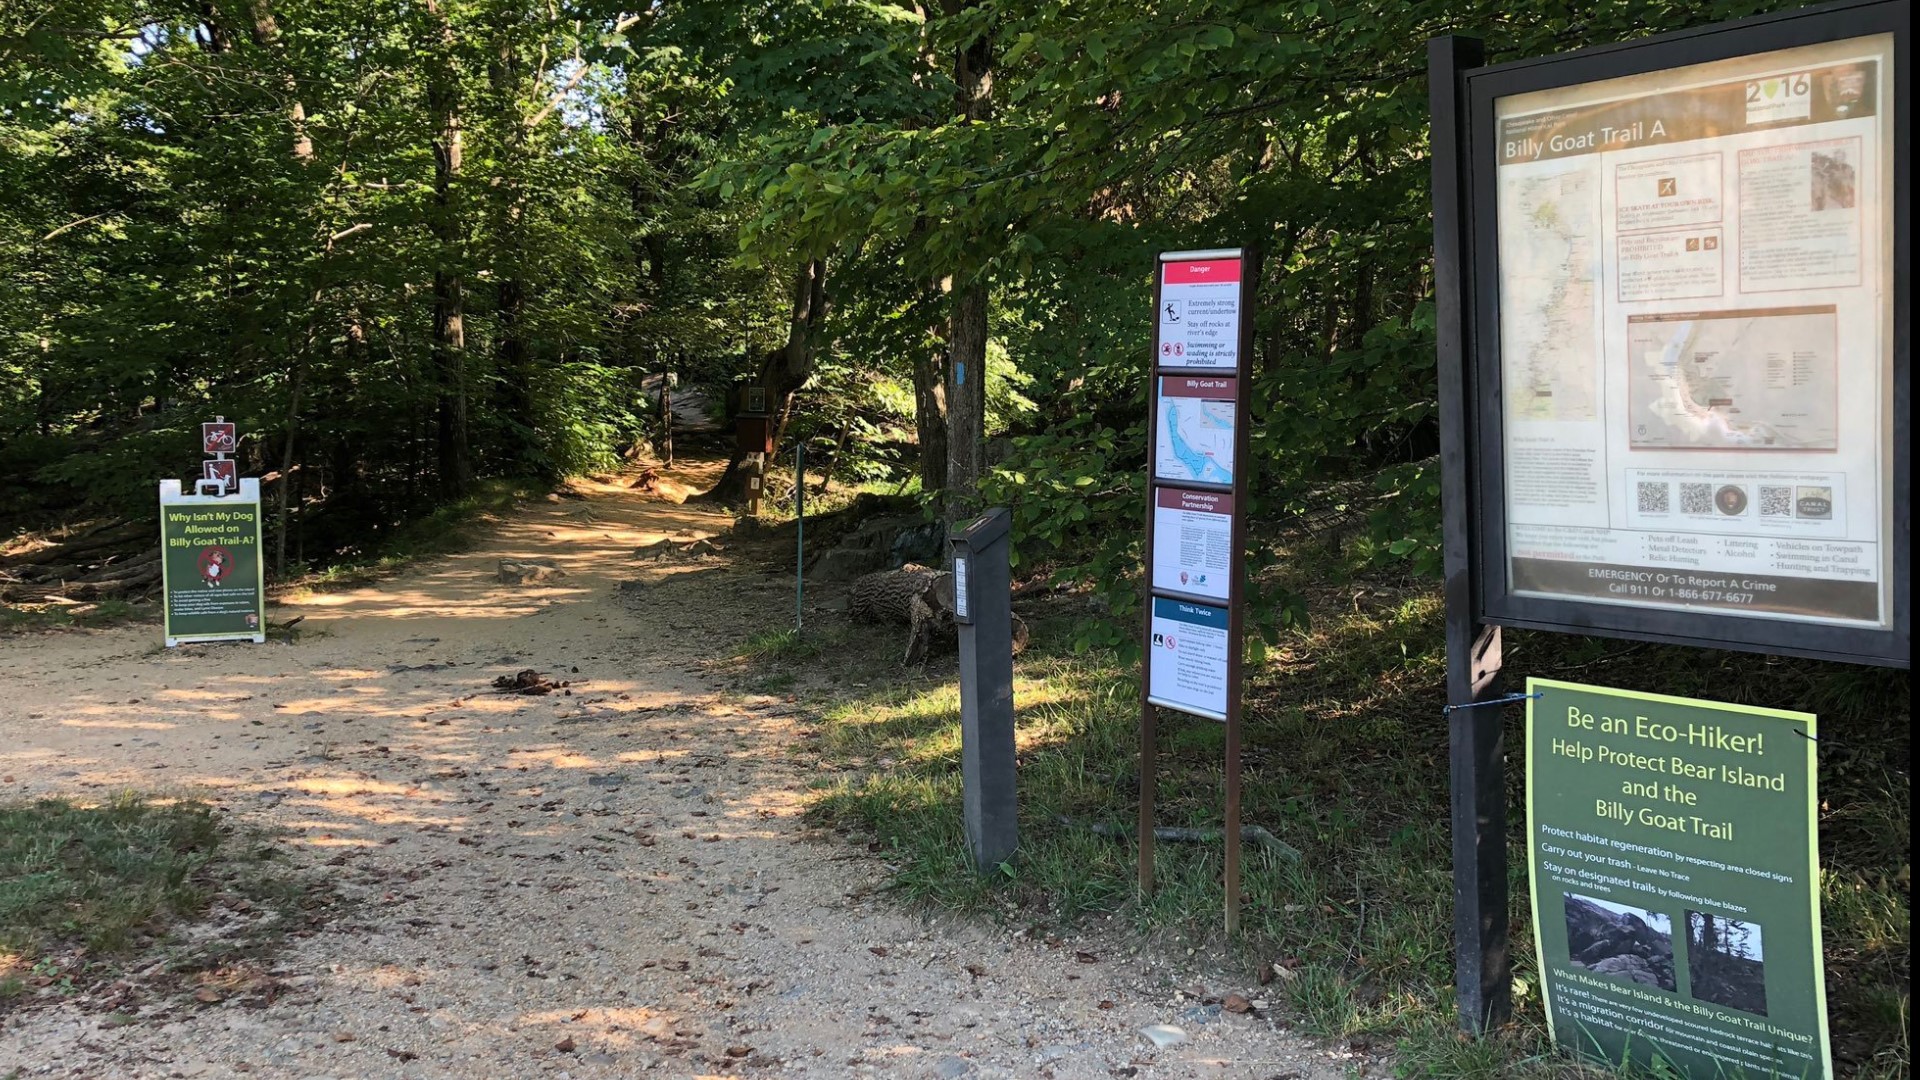 A hiker found unconscious along the C and O Canal Saturday has died. Montgomery County Fire and Rescue say the woman's death may be heat-related. Medics responded to emergency calls on the Billy Goat Trail Saturday.